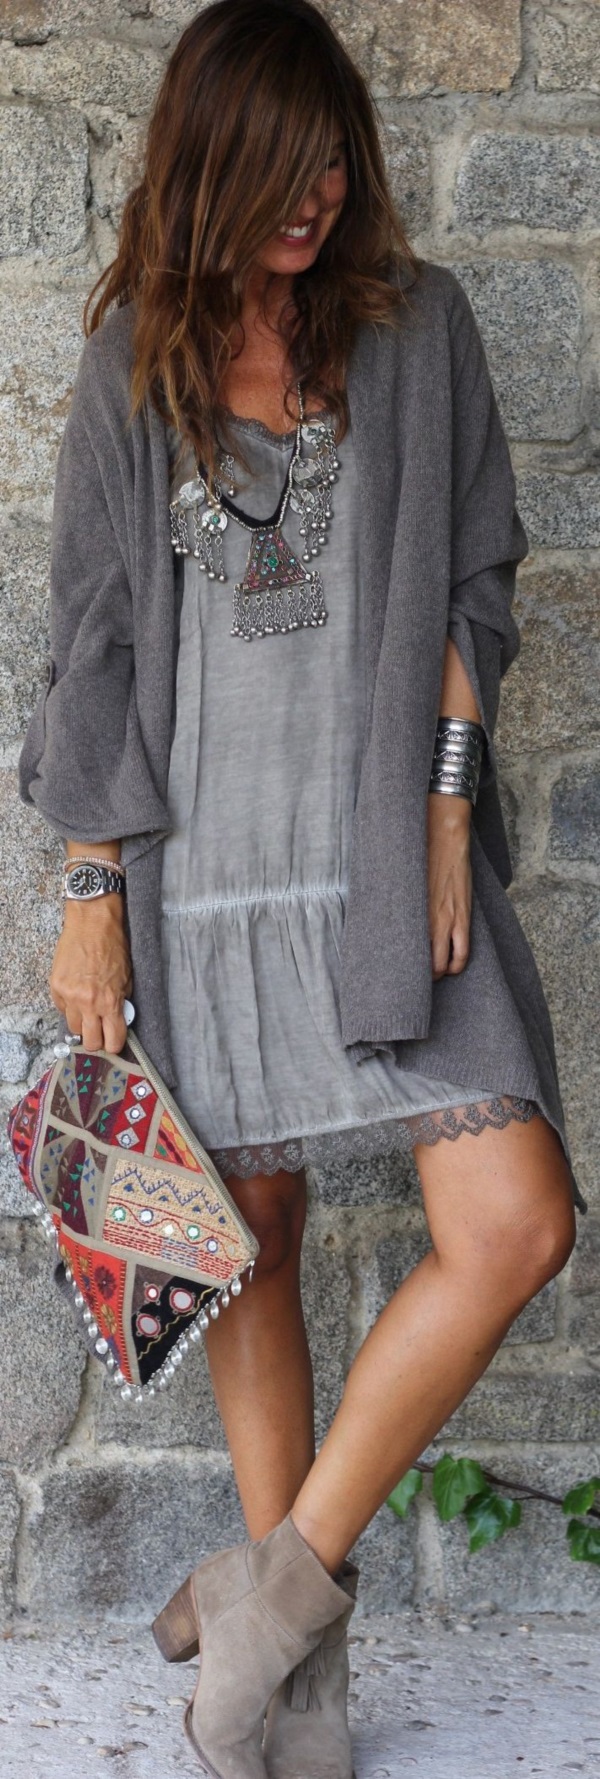 Adorable Boho Casual Outfits to Look Cool (14)